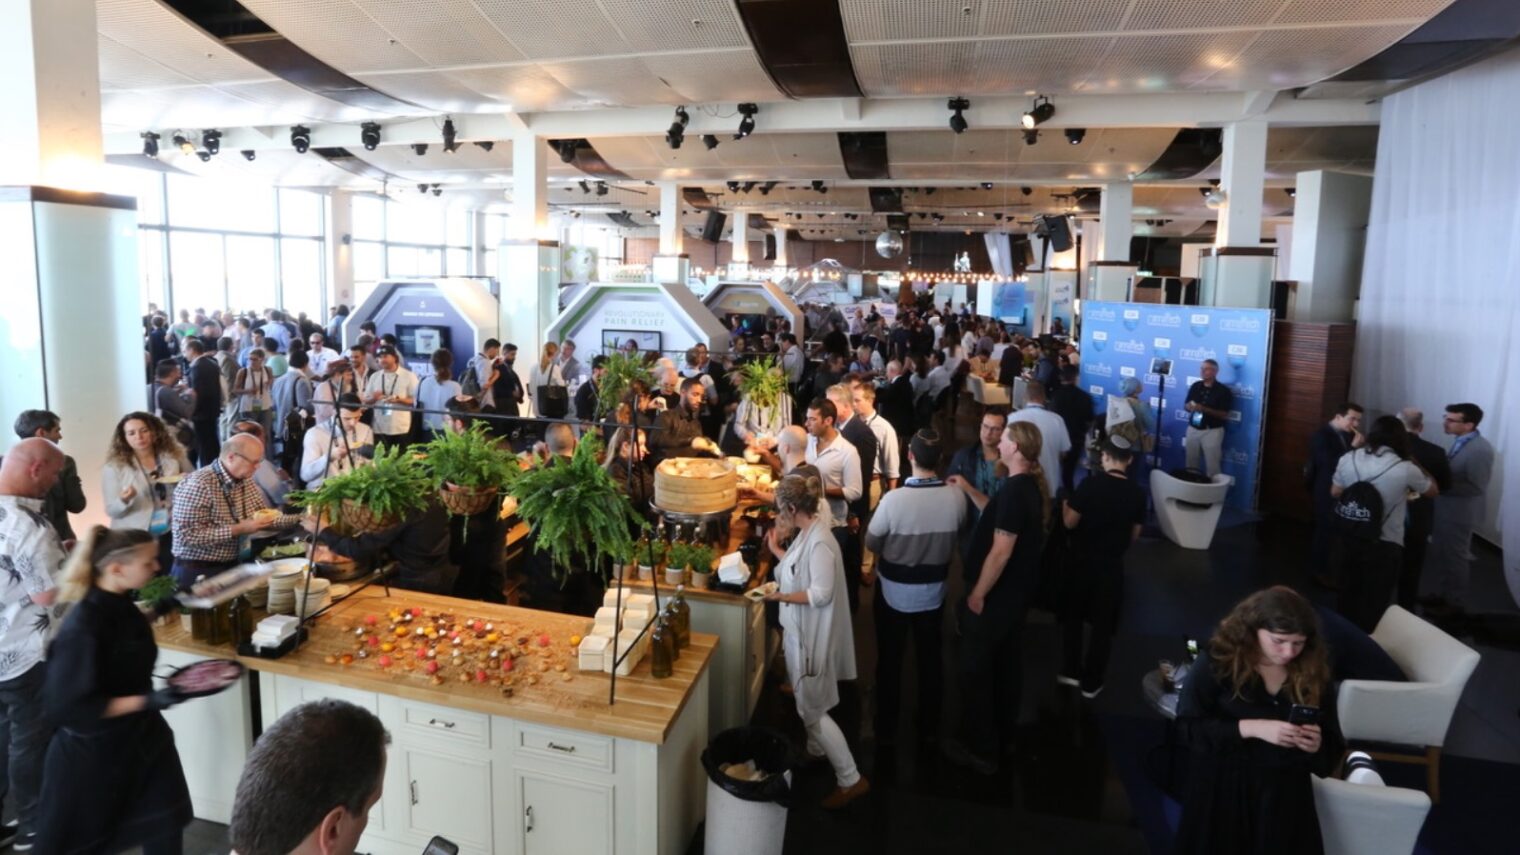 Some 800 people from 40 countries gathered at CannaTech Israel 2018 to network and learn. Photo by Tal Pais/Photogenim